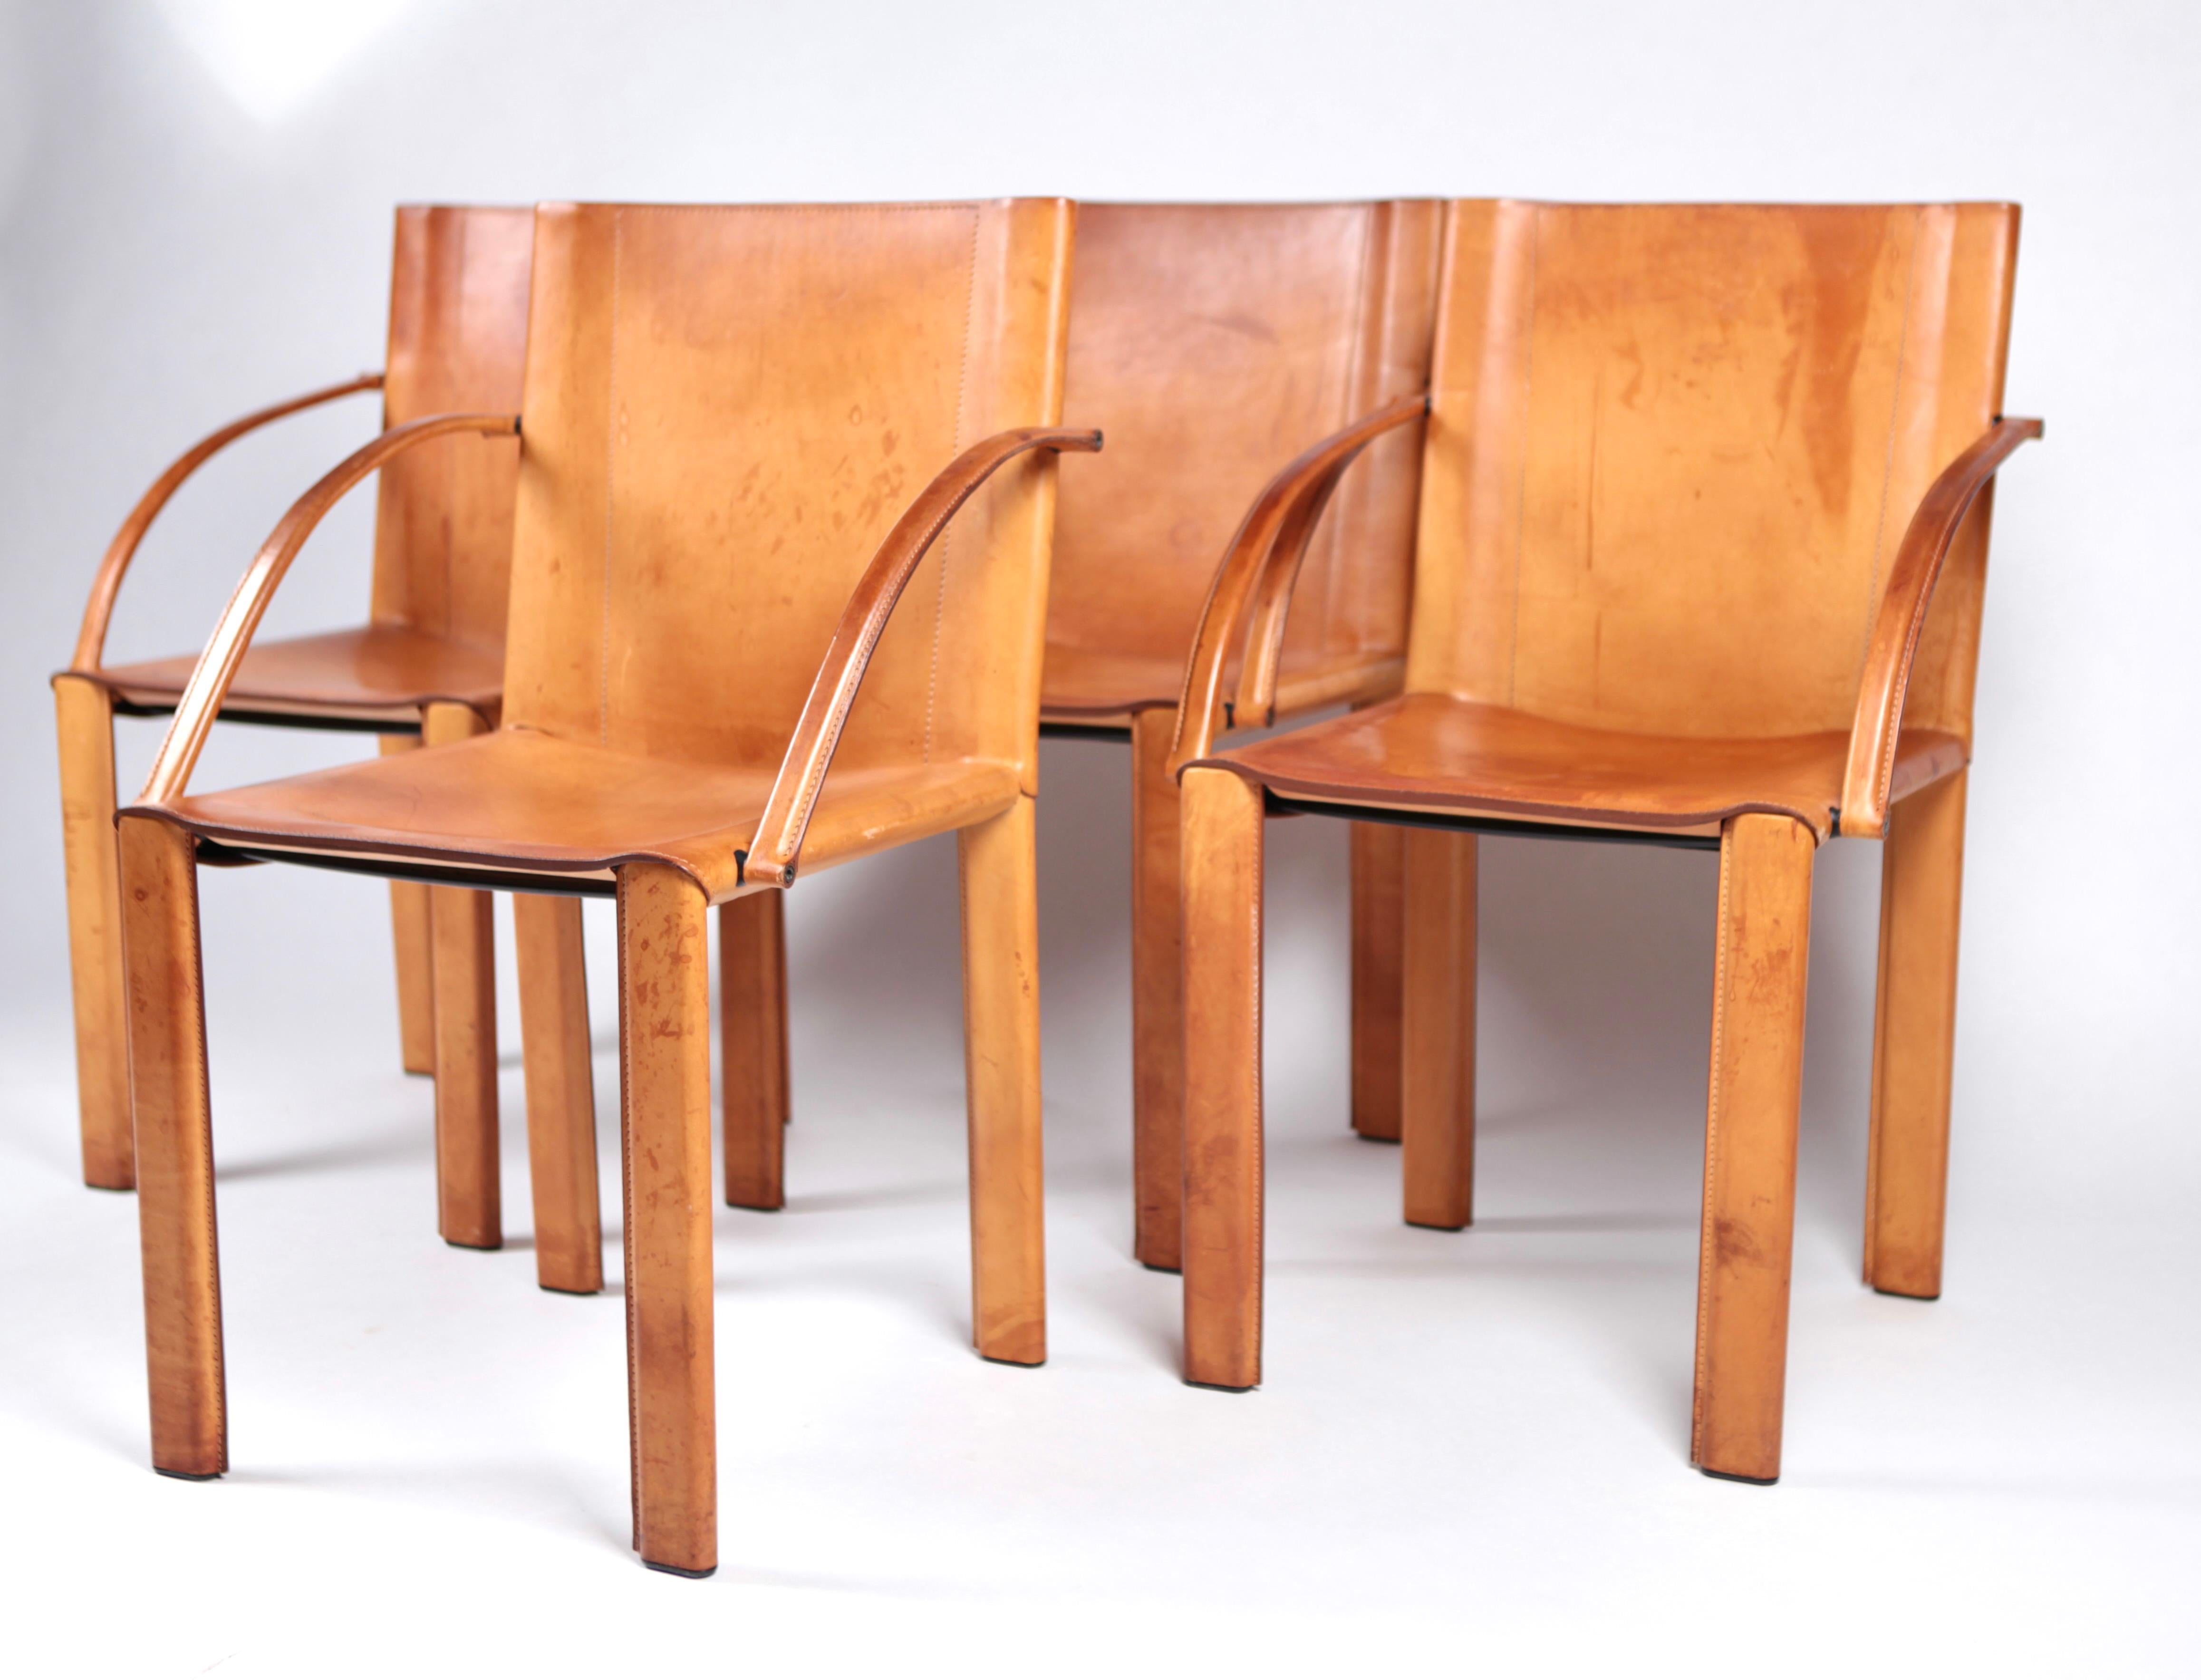 The set is in excellent vintage condition. The leather has some stains due to it's wear and some scratches, but overall a great patina and color.
The chairs are manufactured by Matteograssi, Italy in 1980, and designed by Carlo Bartoli. The full